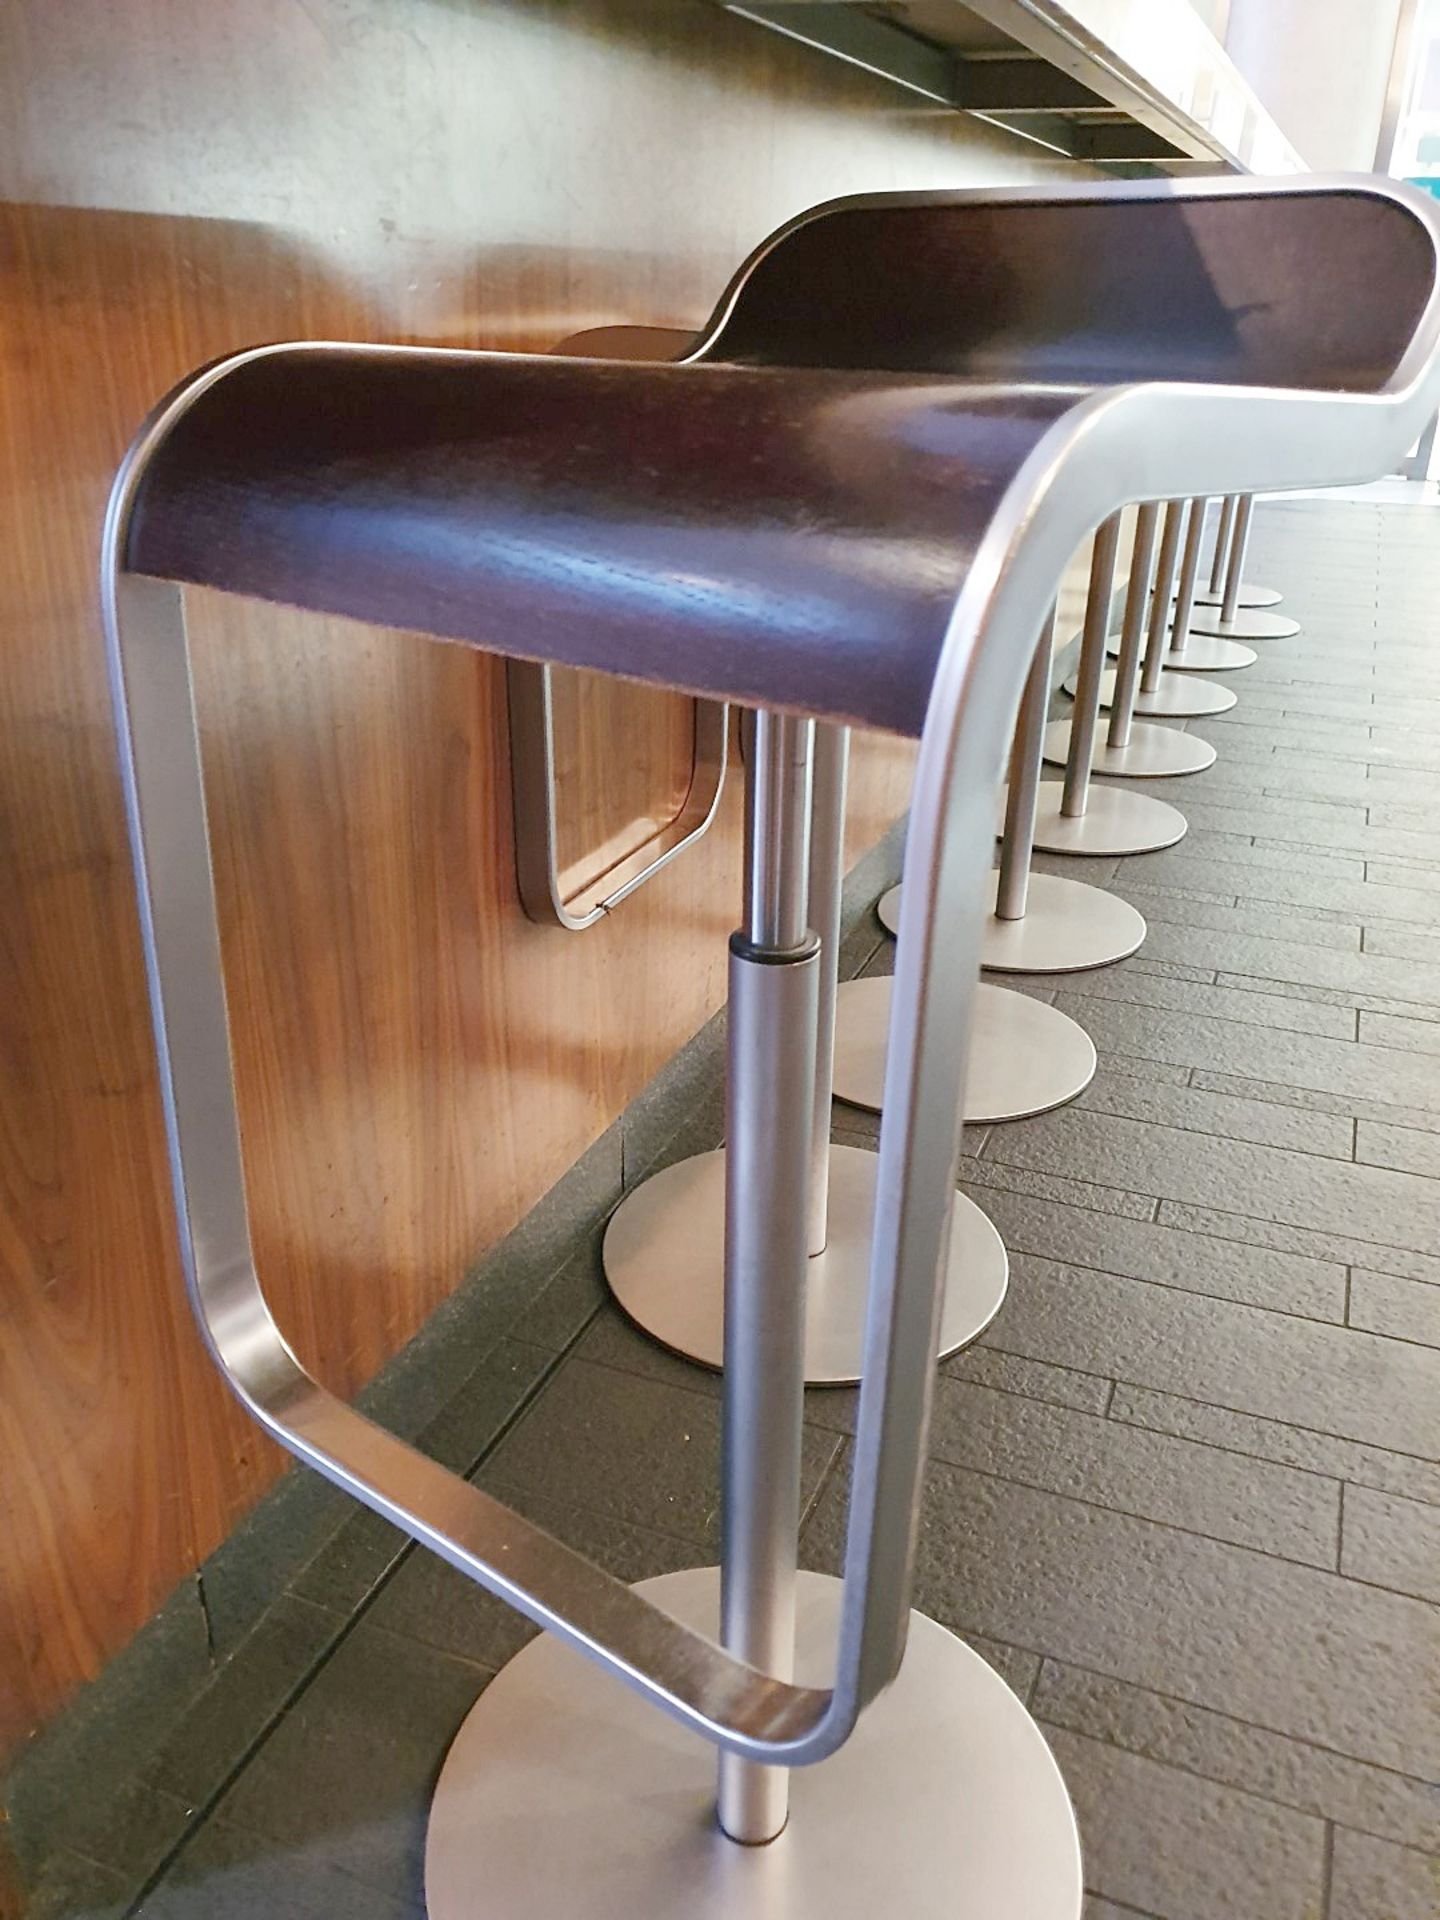 6 x Heavy Duty Commercial Bar Stools With Adjustable Hydraulic Aided Height - Dimensions: 35cm x